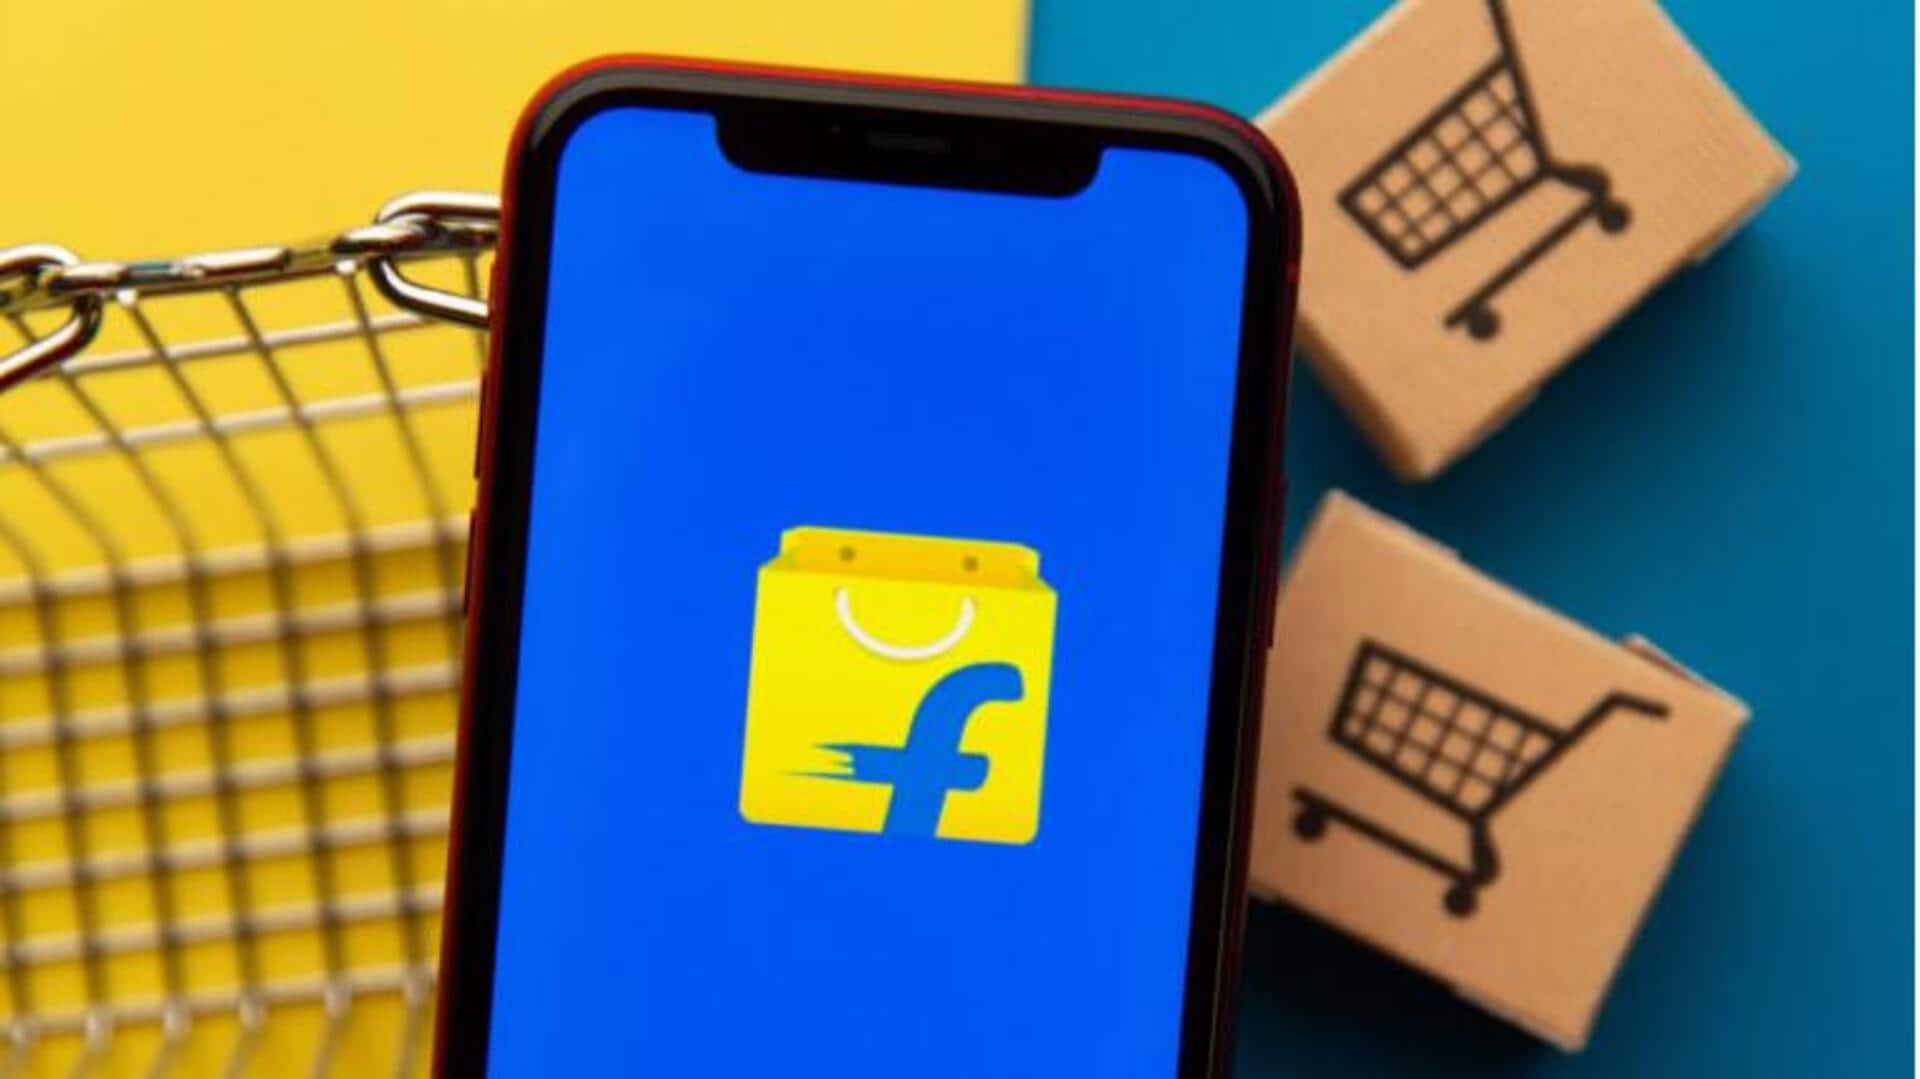 Flipkart to launch new 'payment product' within a month